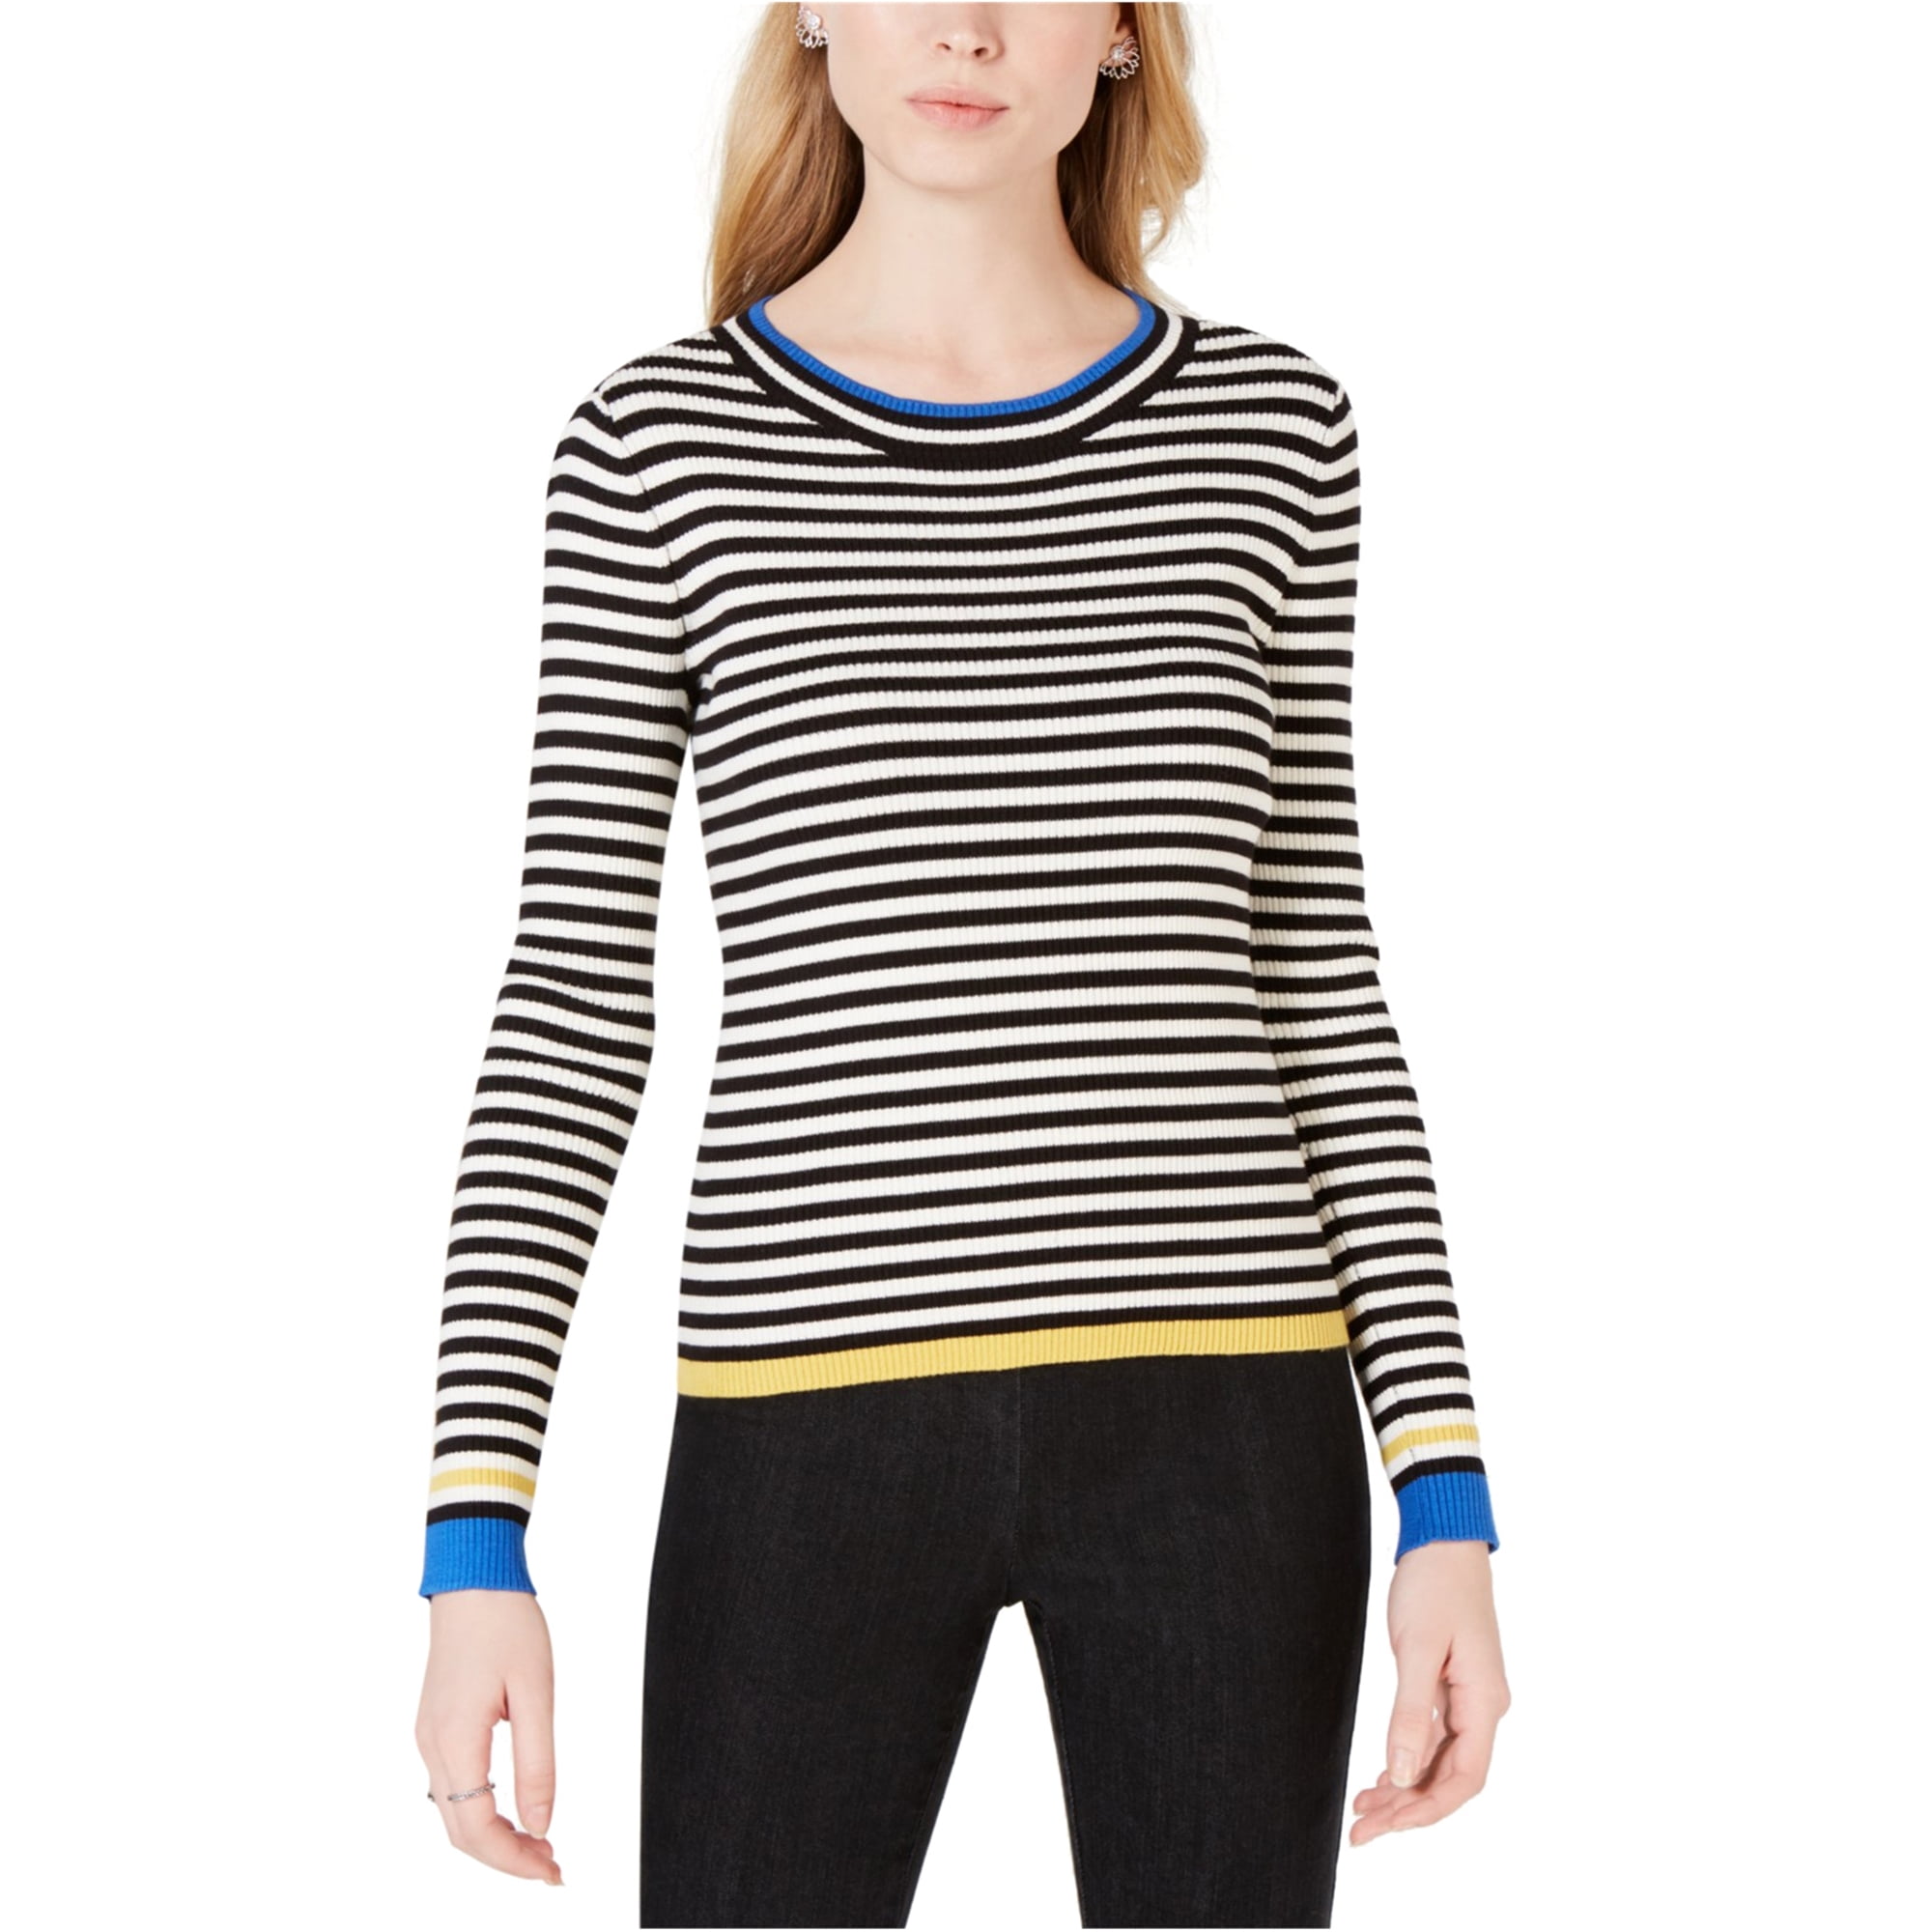 Maison Jules Womens Striped Ribbed Knit Casual Top